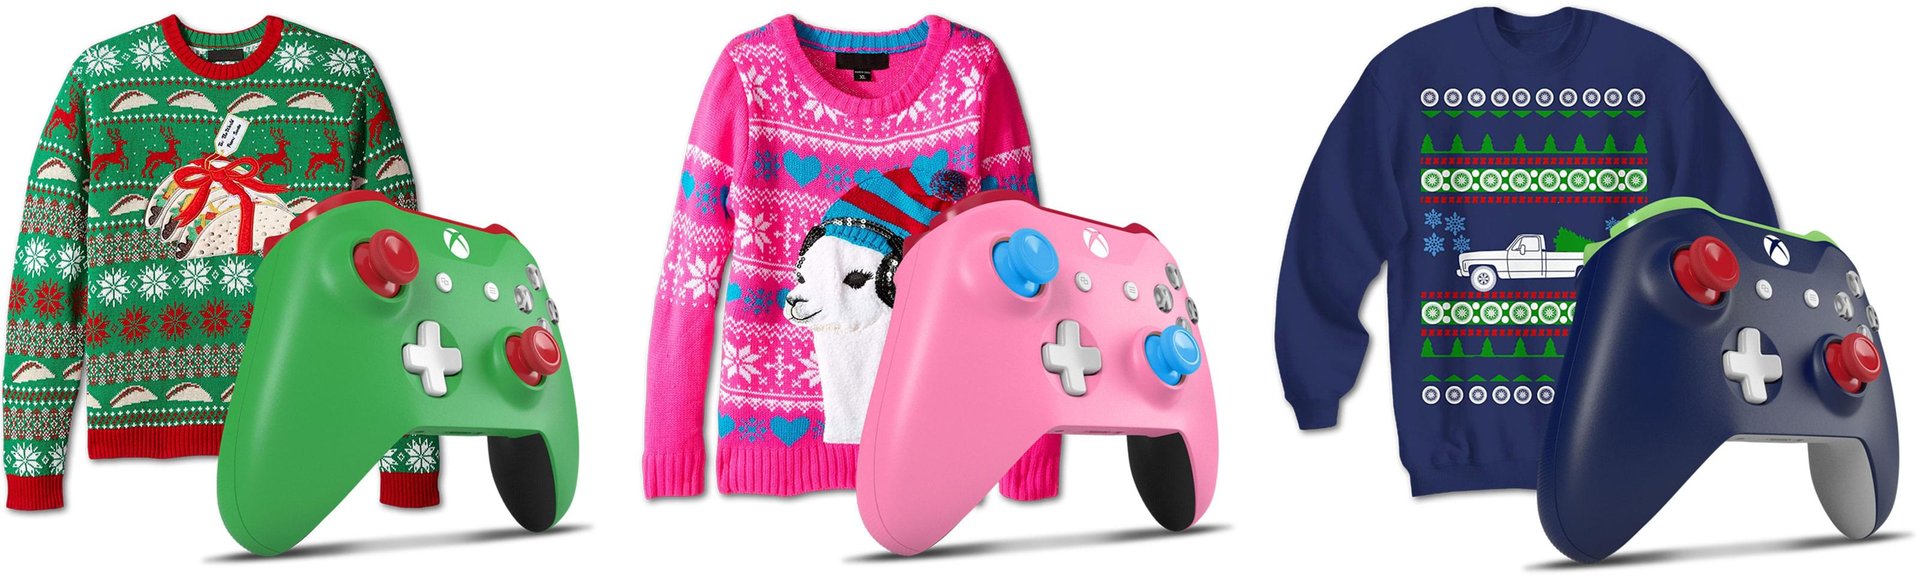 Holiday Sweaters with Matching Controller